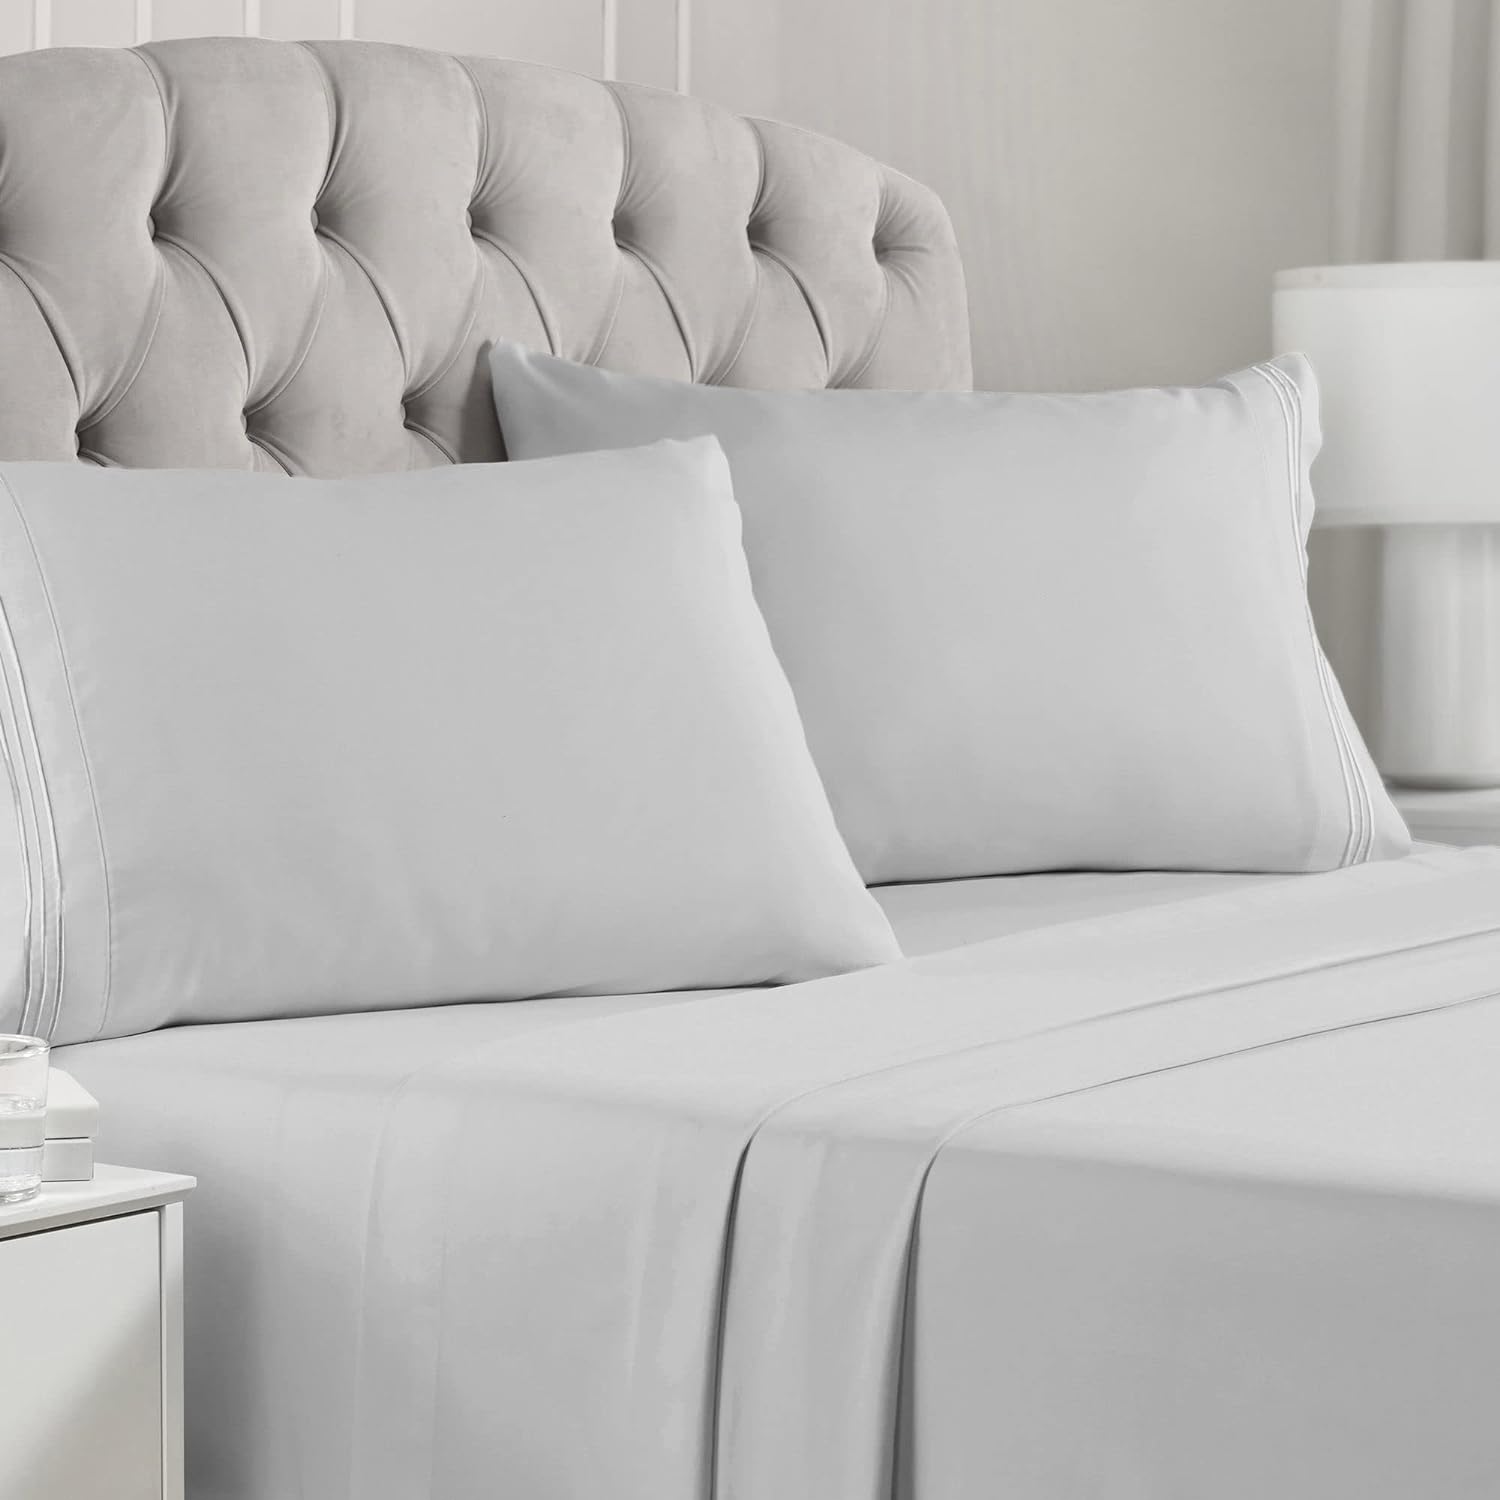 Mellanni Sheets for Queen Size Bed - 4 PC Iconic Collection Bedding Sheets & Pillowcases - Luxury, Soft, Cooling Bed Sheets - Deep Pocket up to 16 - Wrinkle, Fade, Stain Resistant (Queen, Light Gray) 